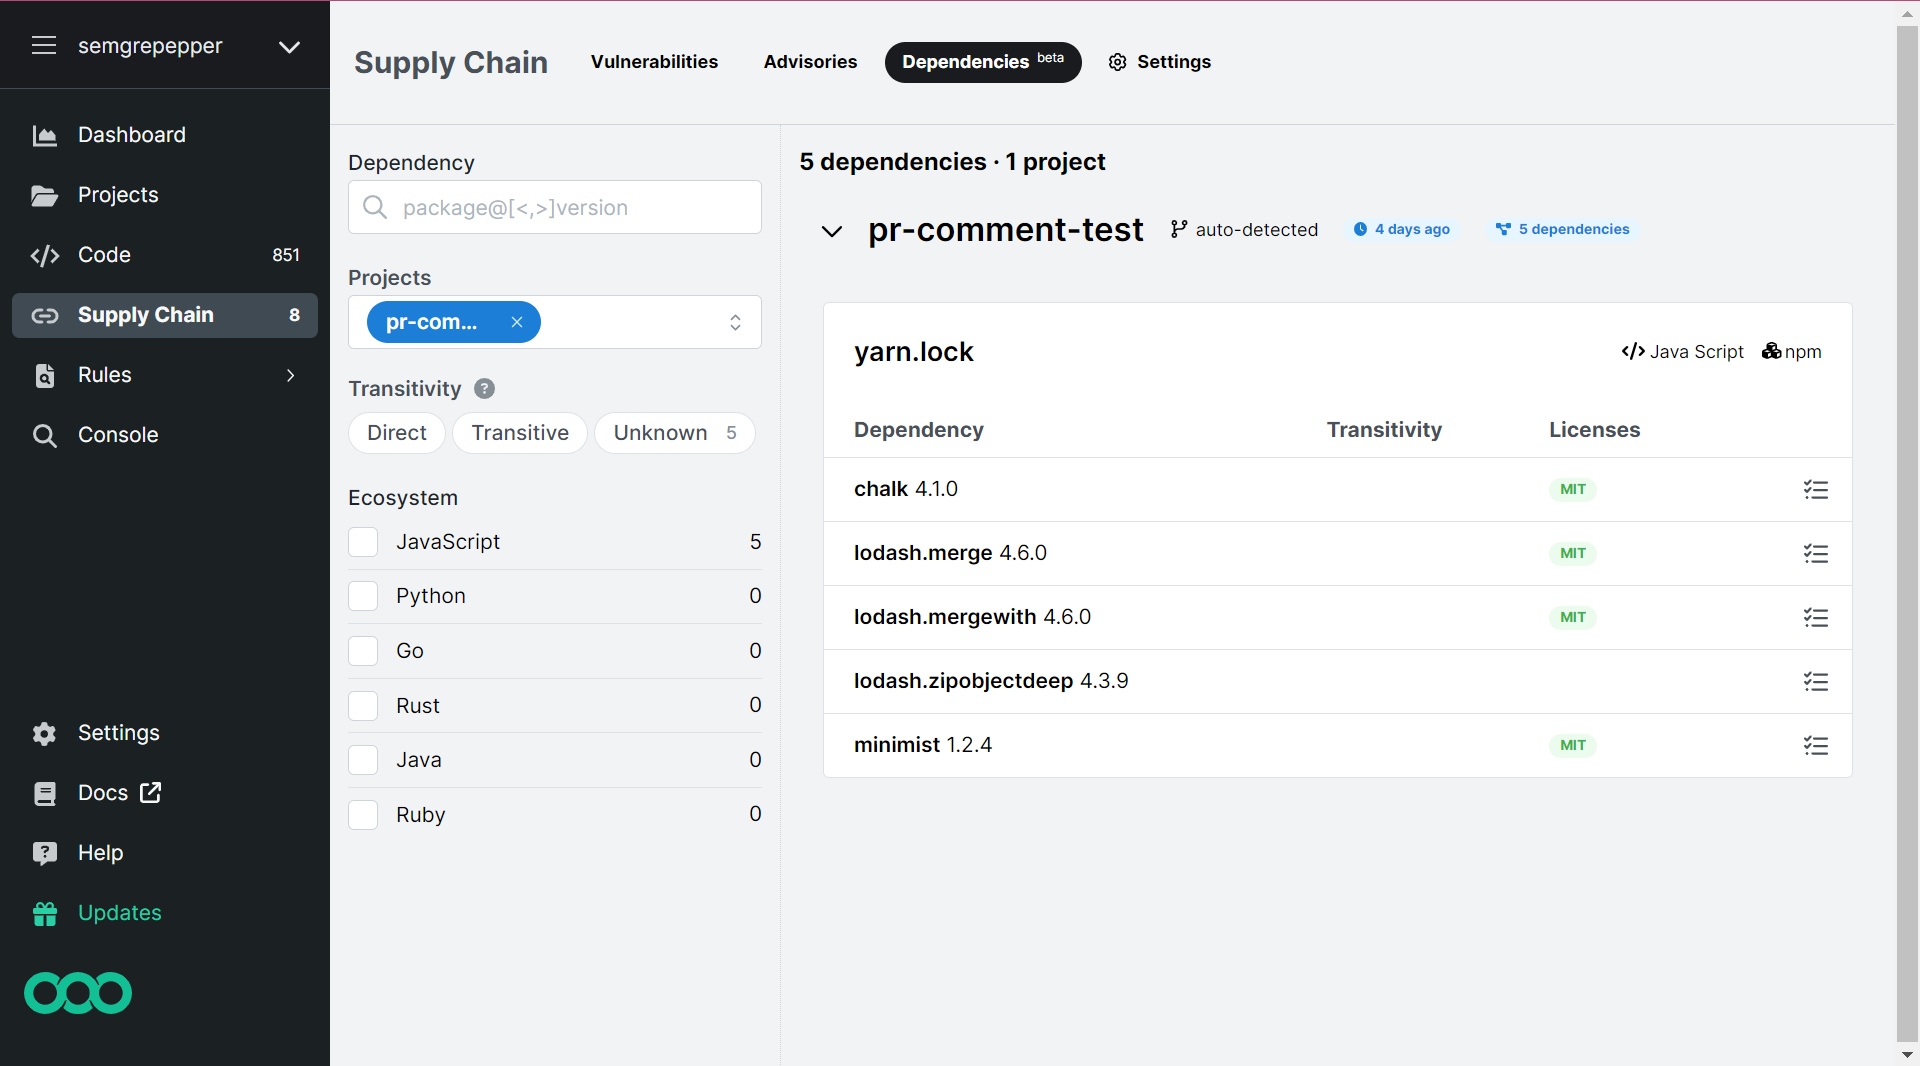 Screenshot of Semgrep Supply Chain Dependencies tab with licenses listed